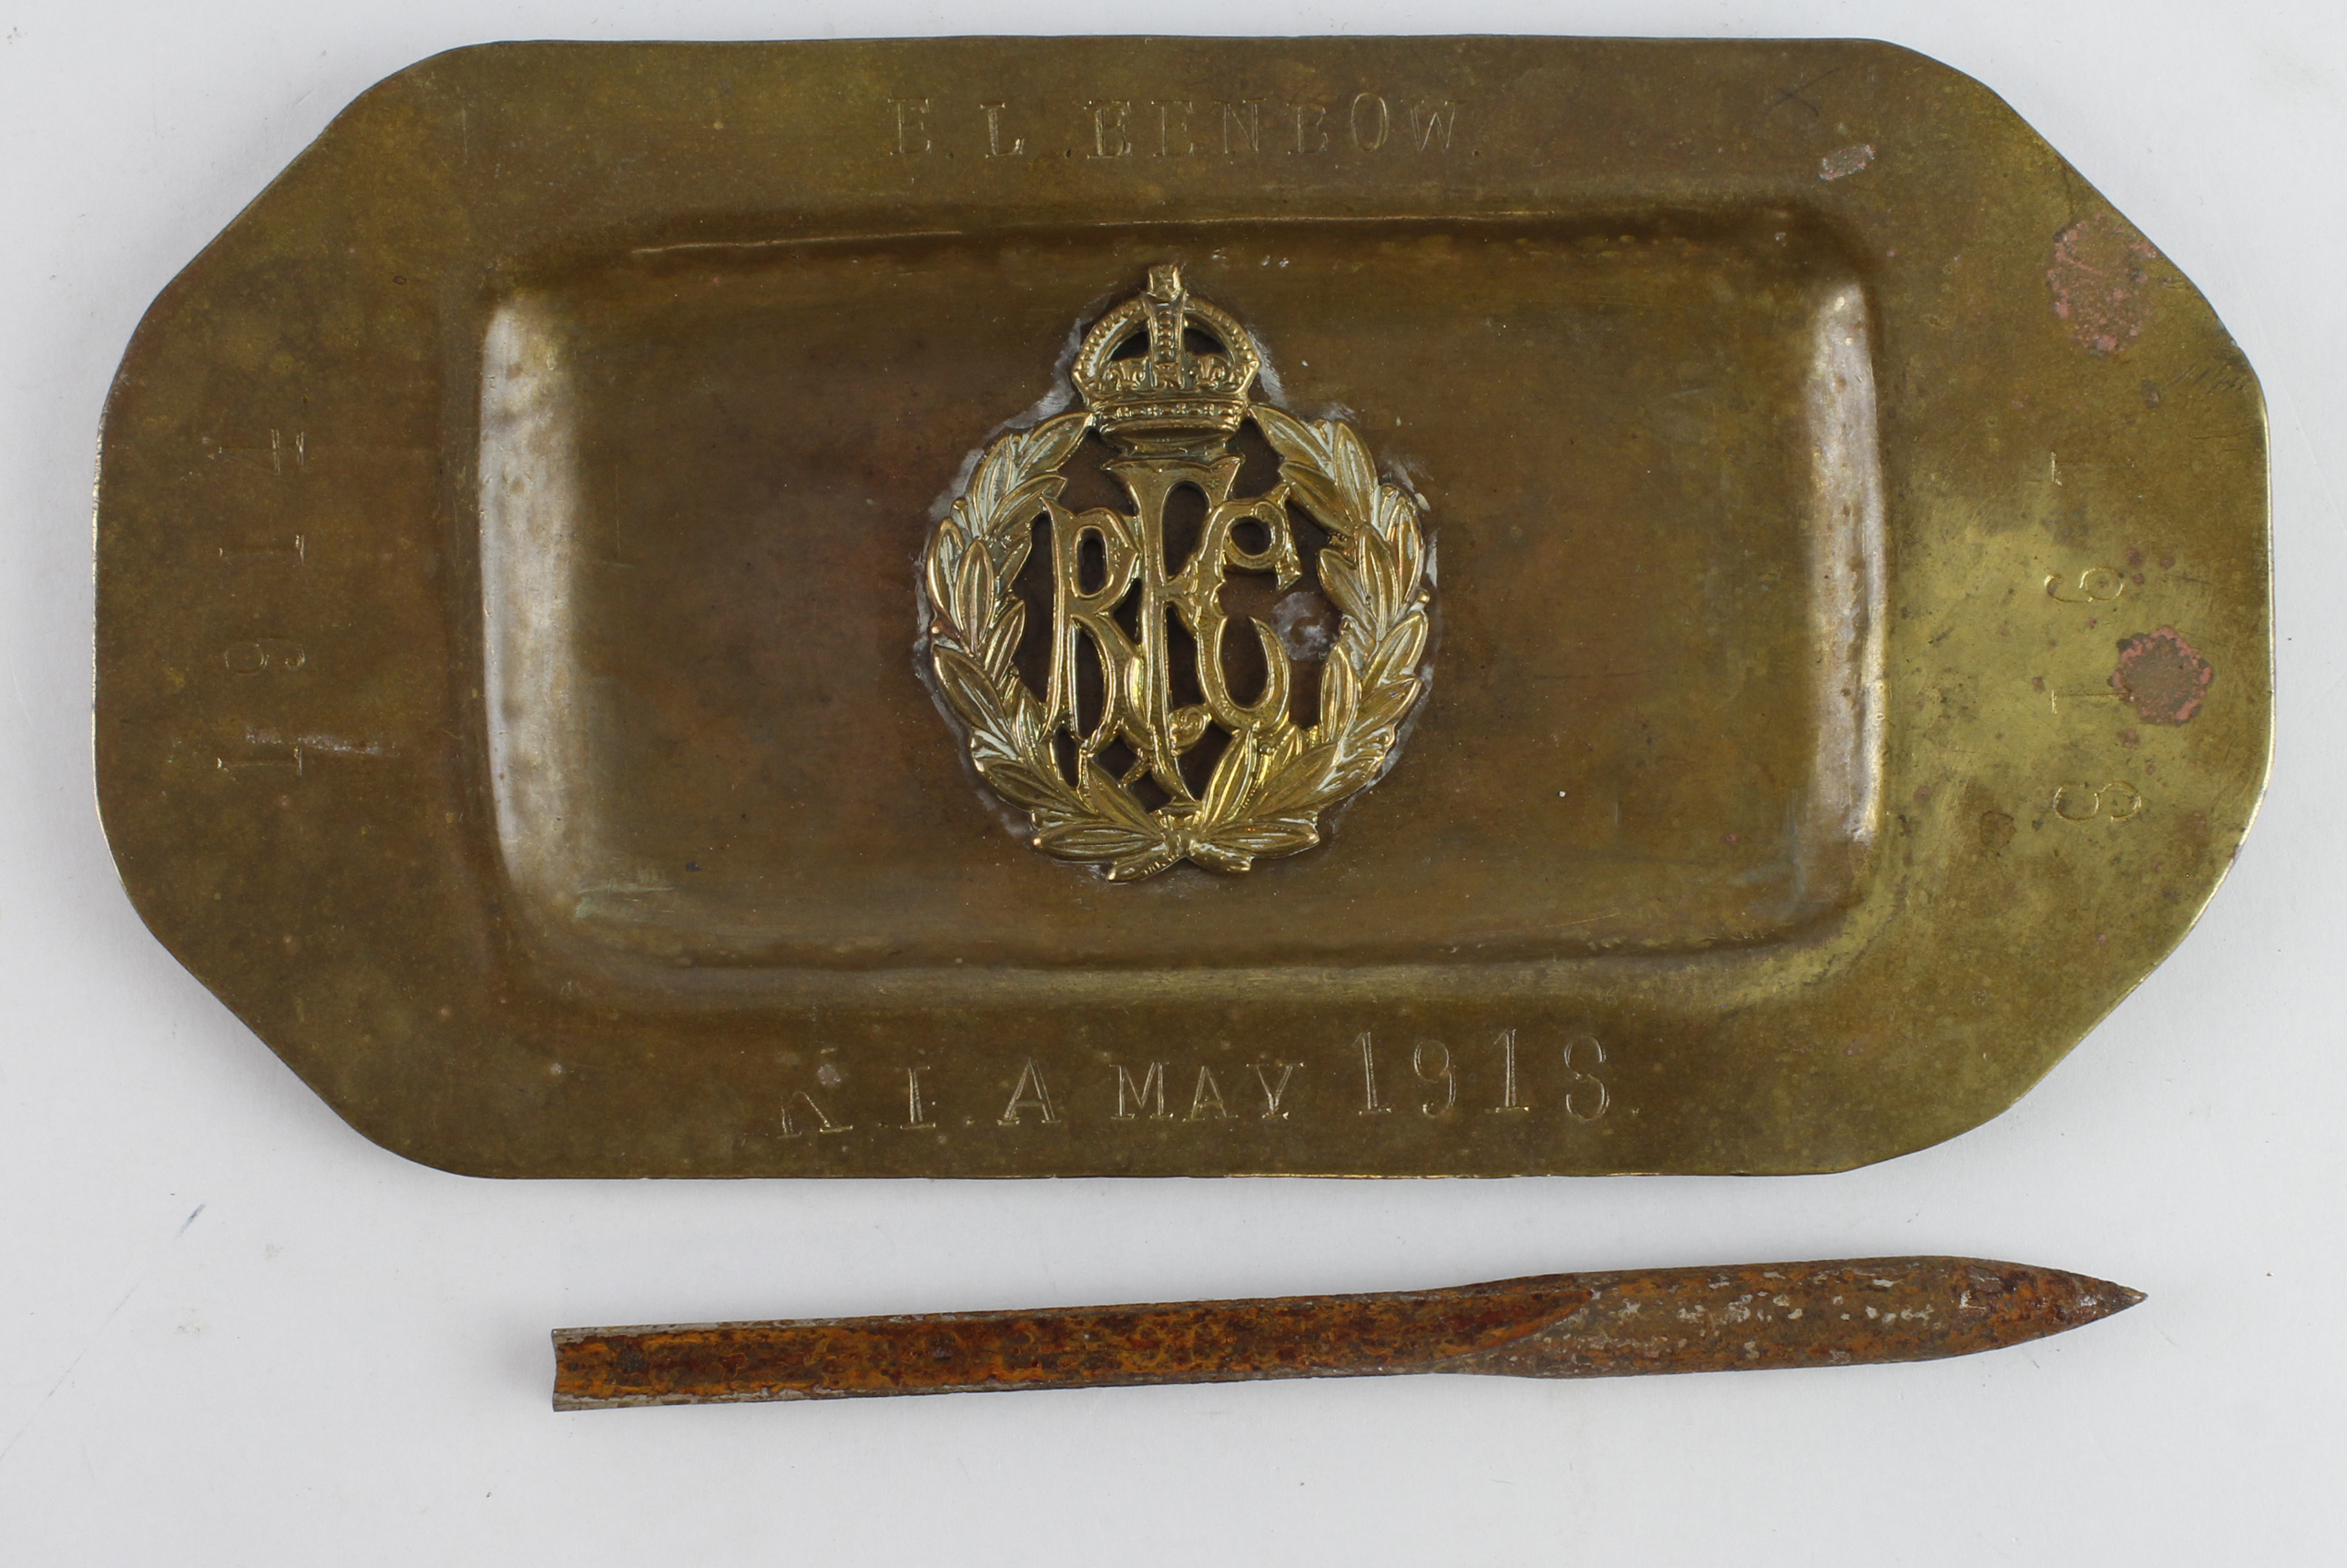 RFC WW1 ashtray marked E L Benbow KIA May 1918 a commemorative piece made by groundcrew? and a